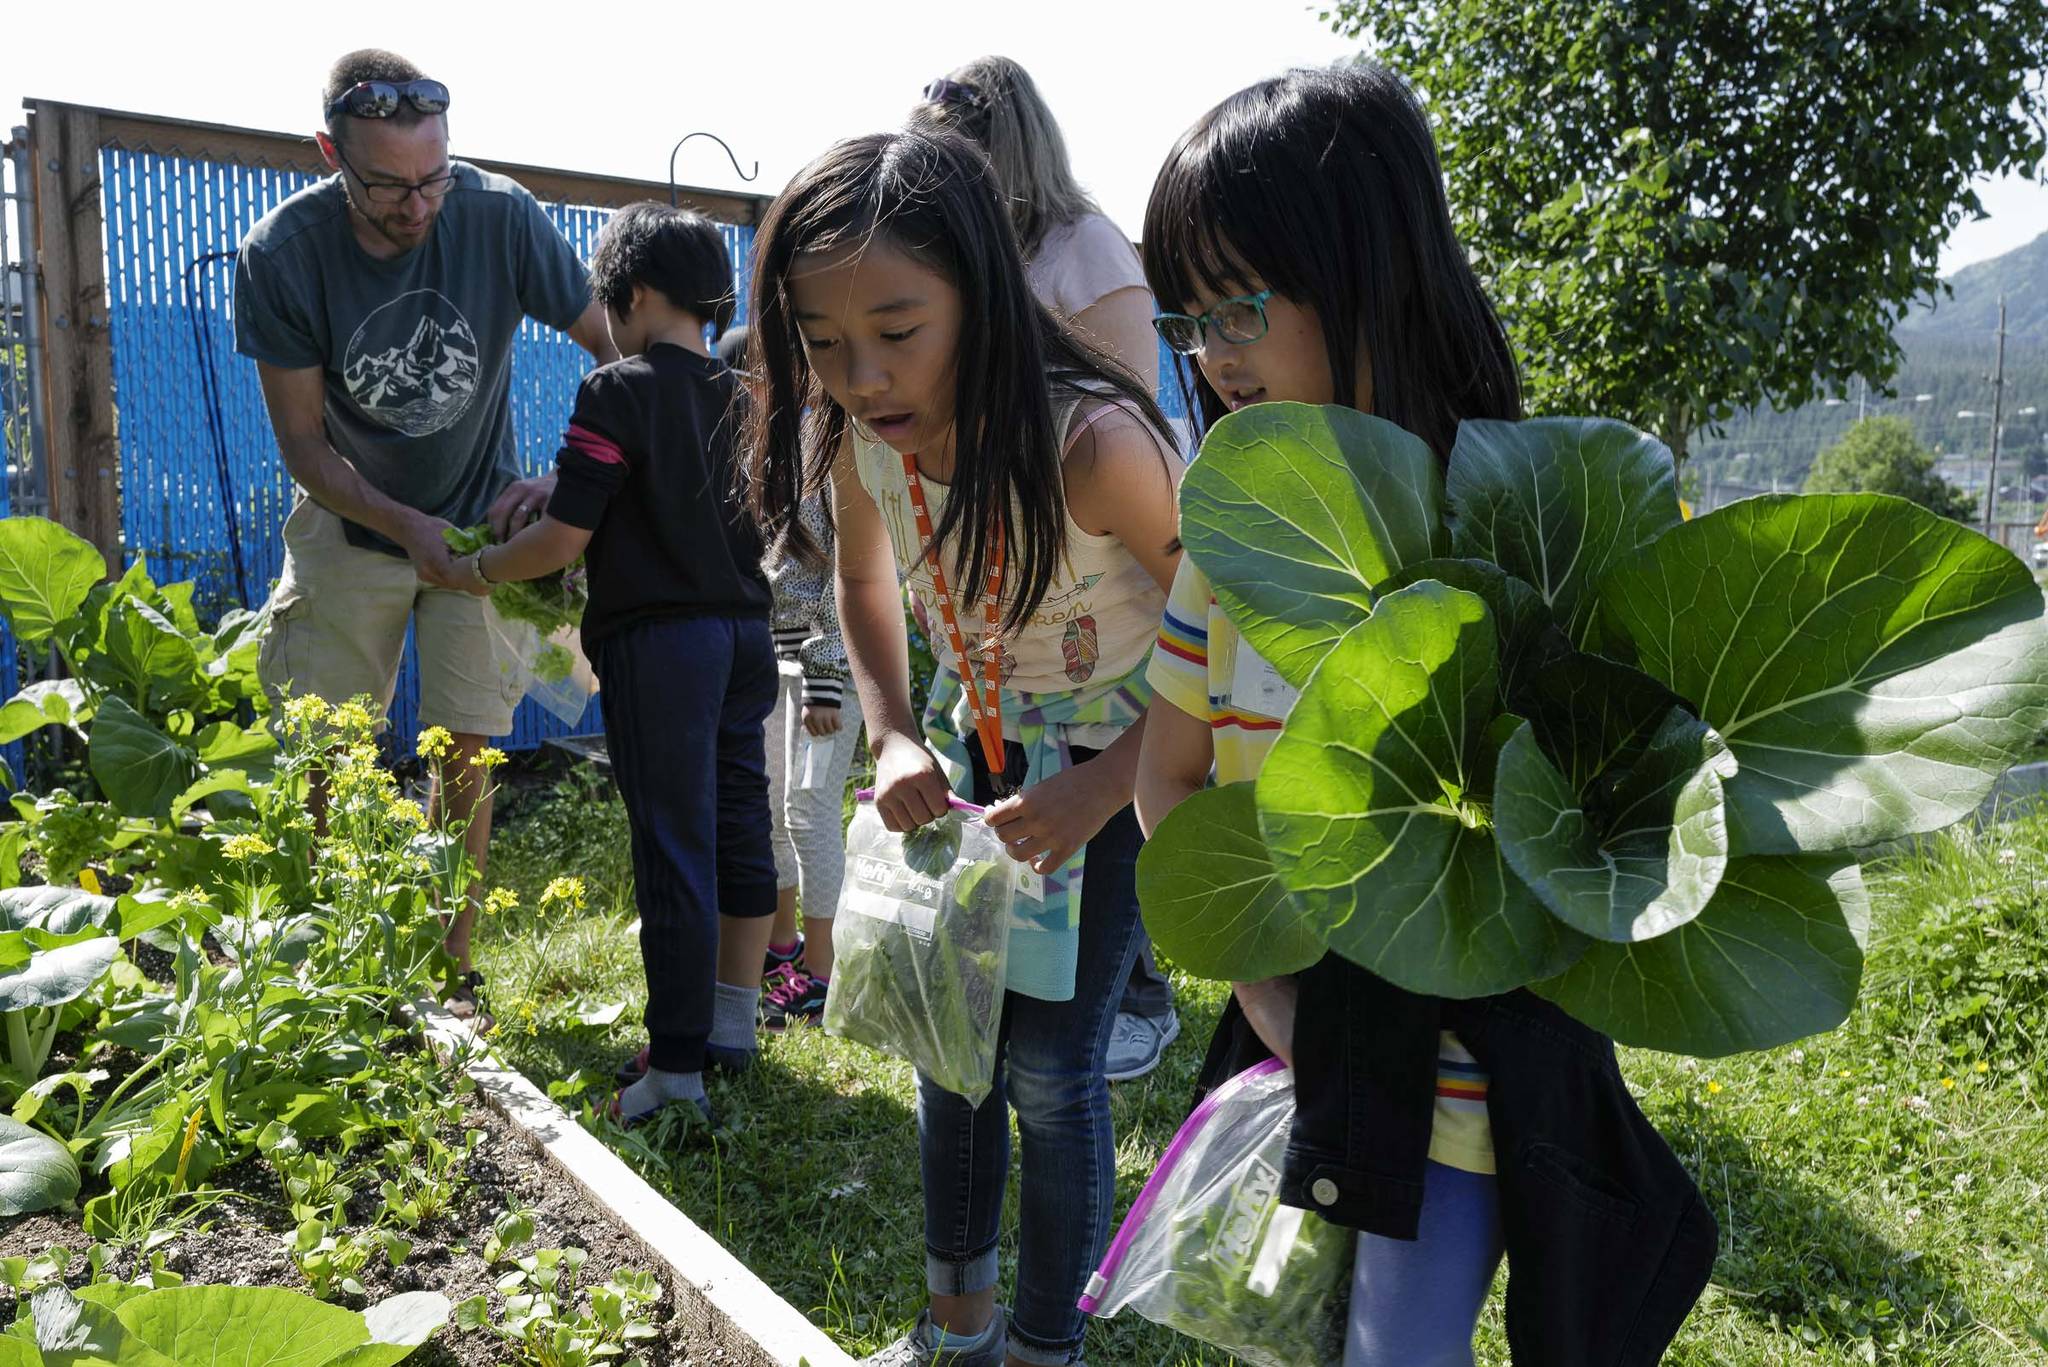 Elyzsa Sapinoso, left, and Emery Marte look at the garden as Master gardener Joel Bos helps student harvest plants in the Farm to School program at Harborview Elementary School on Wednesday, June 26, 2019. (Michael Penn | Juneau Empire)